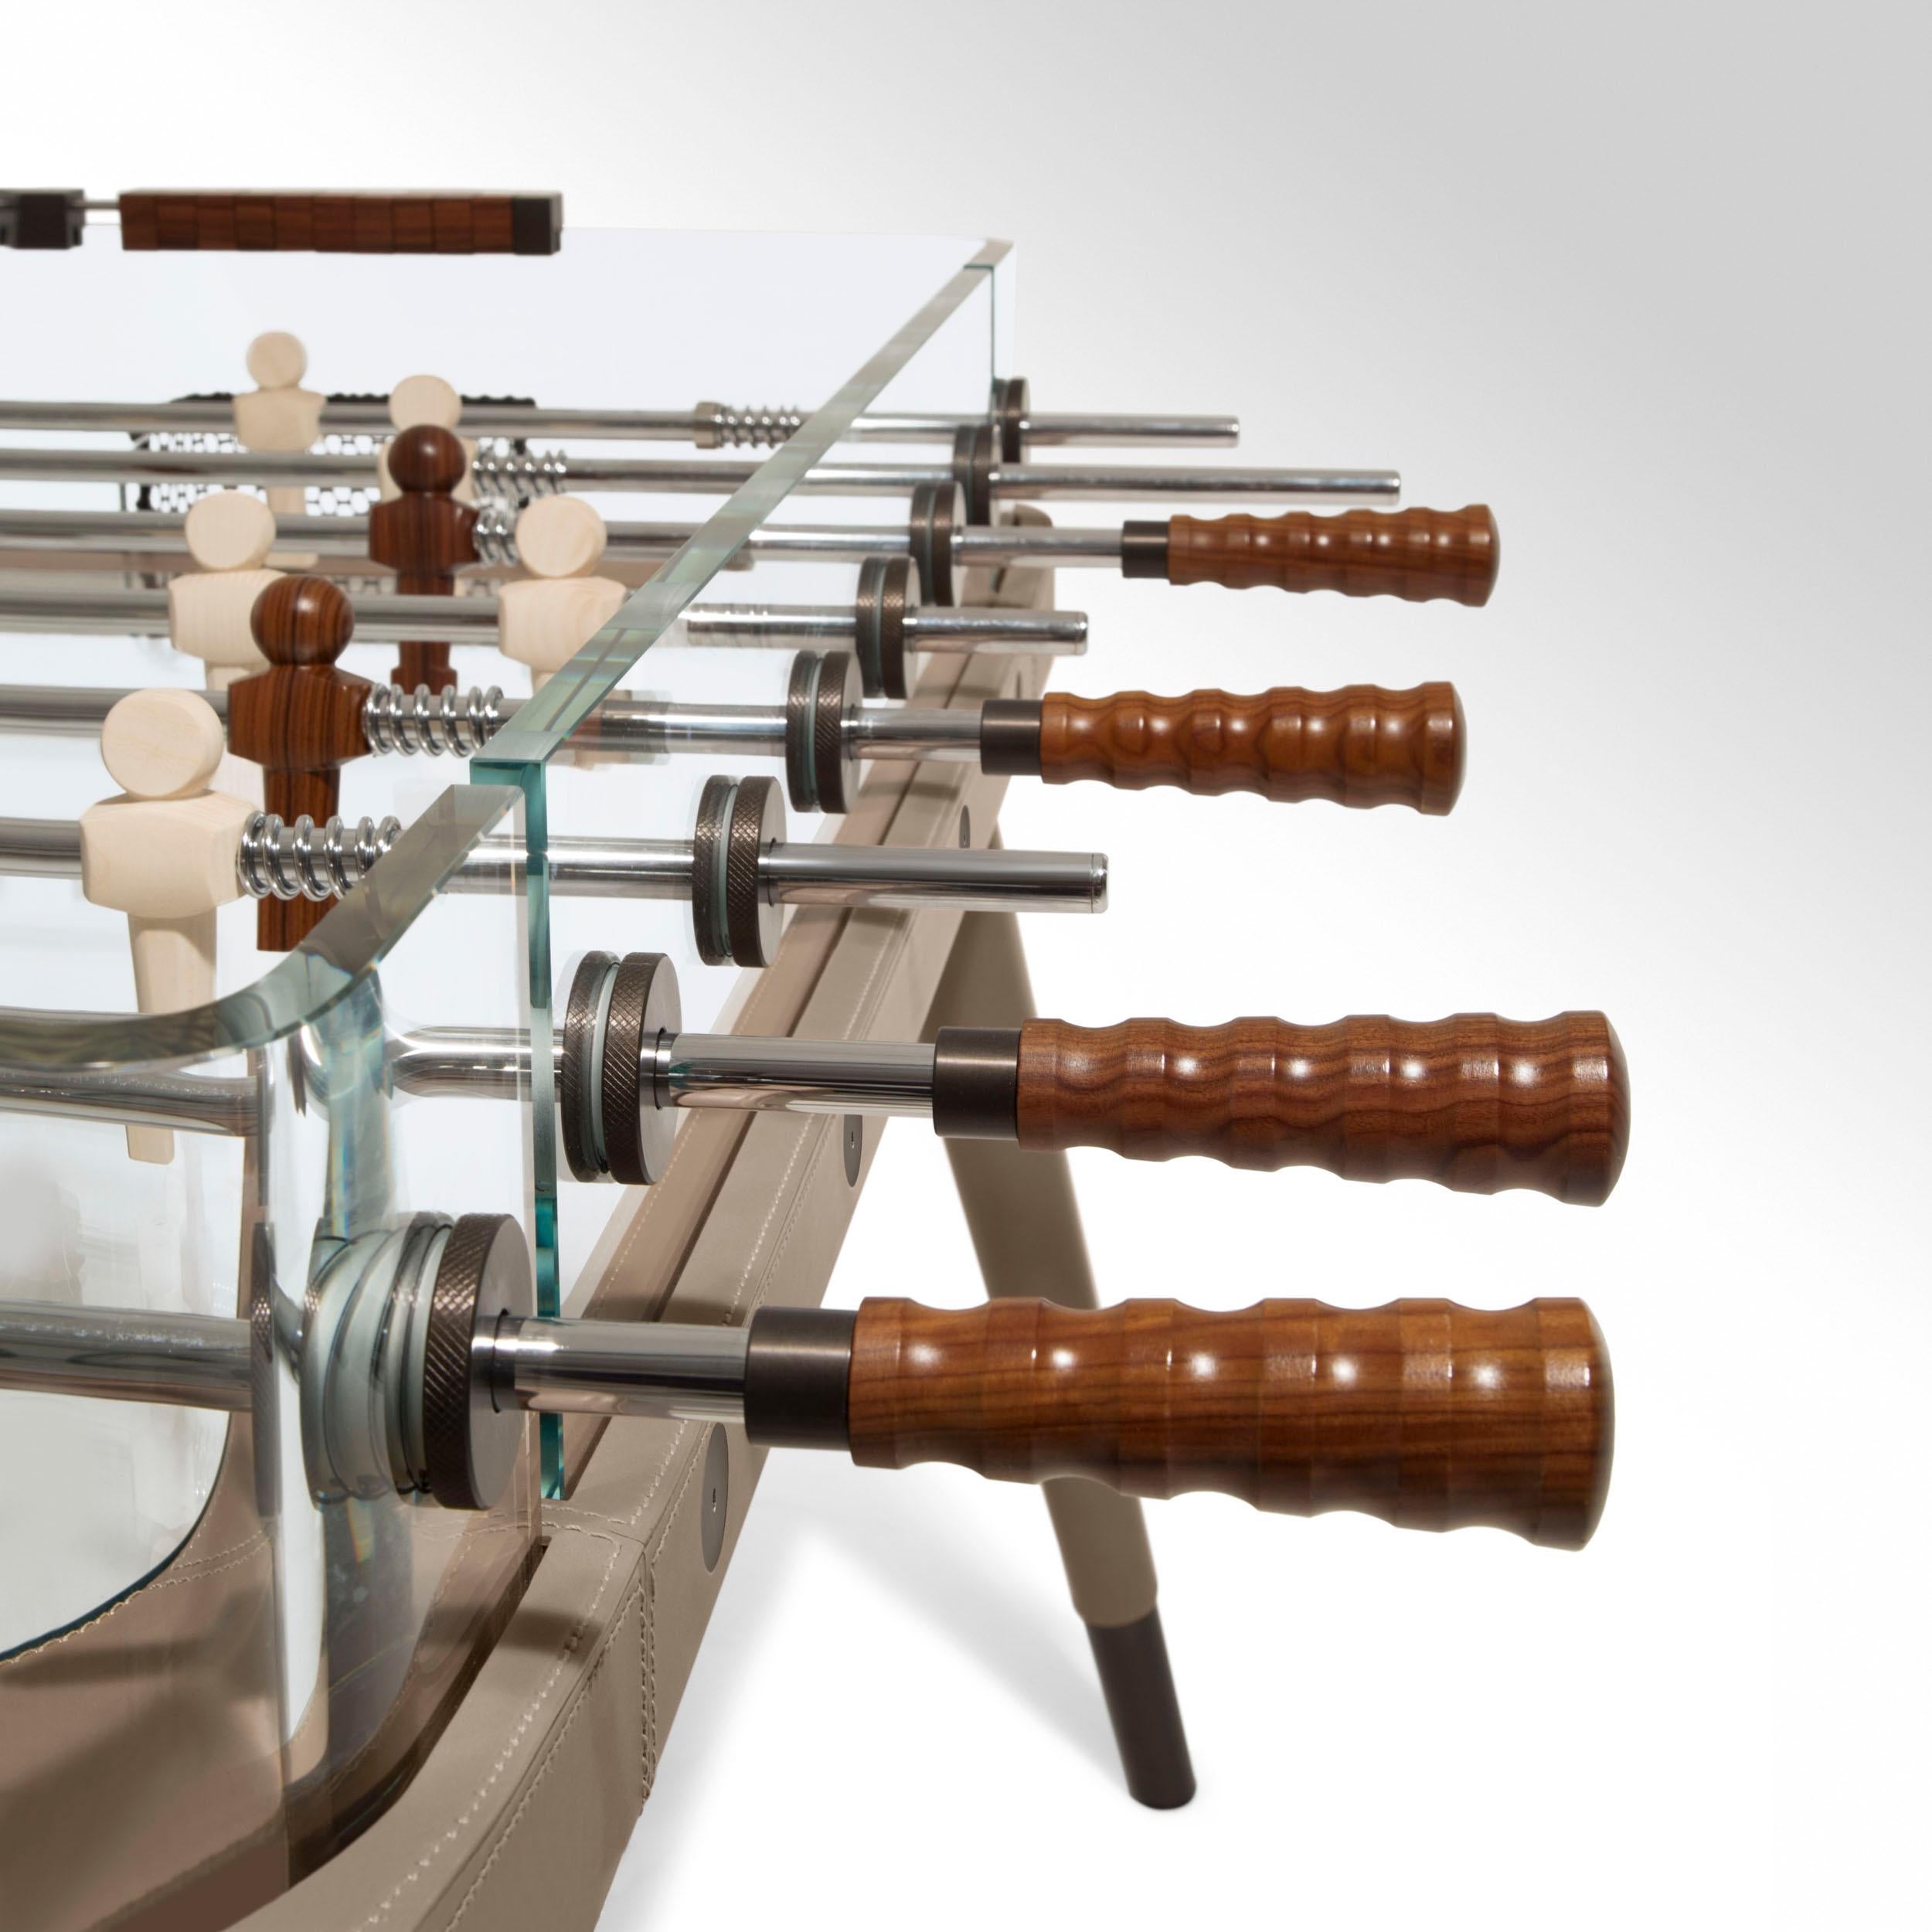 Table football with tub and curved sides made of extra-clear glass, thickness 8 - 15 mm.
The legs and frame are made of wood, covered in leather, available in different shades, making this table soccer
one of its kind. The knobs are pau ferro and